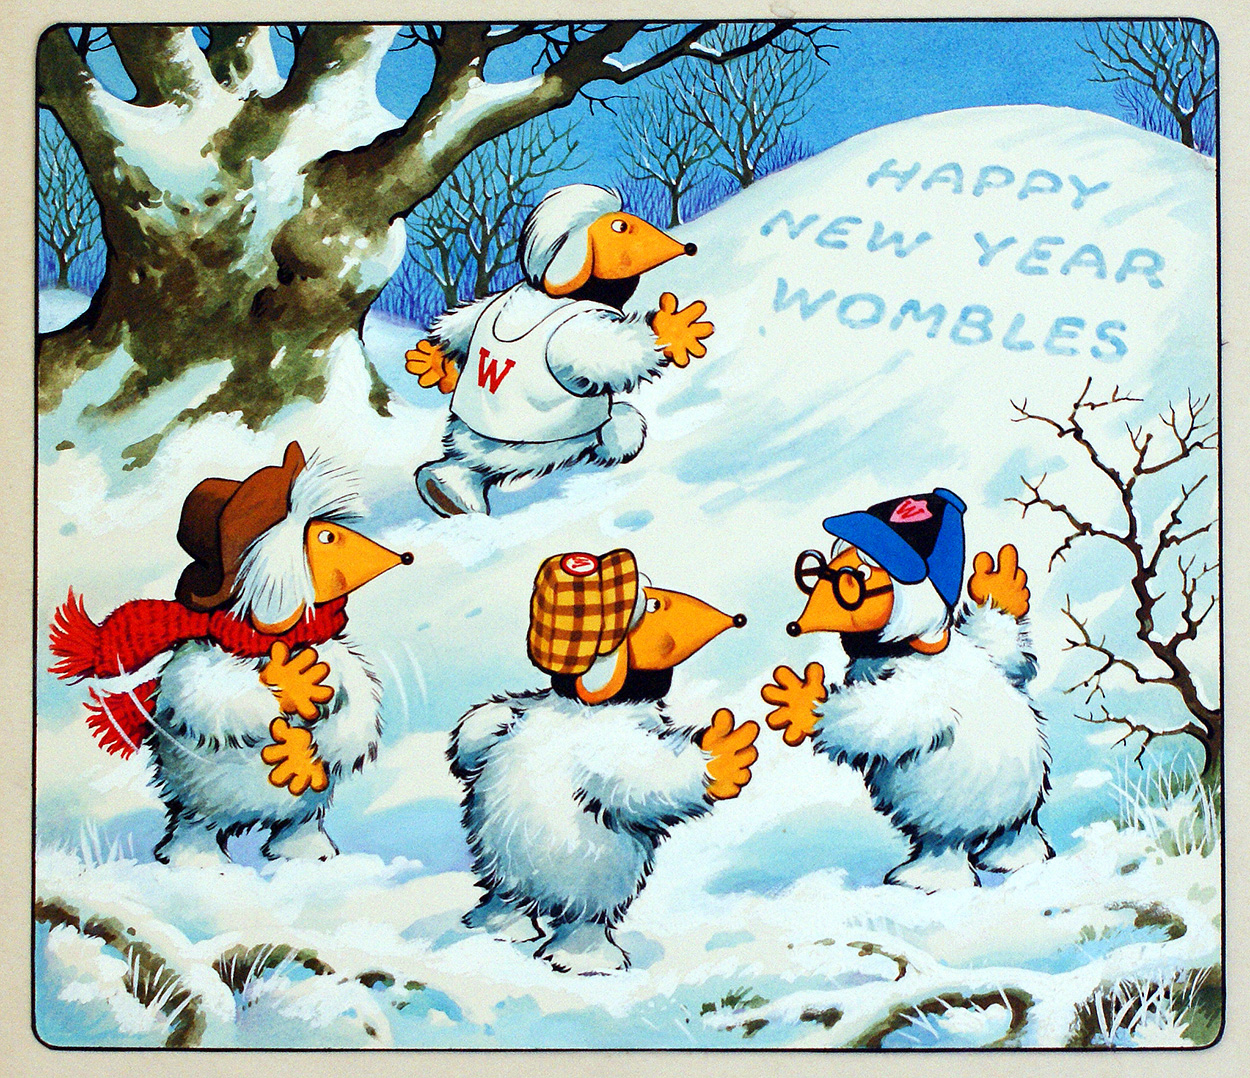 Happy New Year Wombles (Original) art by The Wombles (Blasco) Art at The Illustration Art Gallery